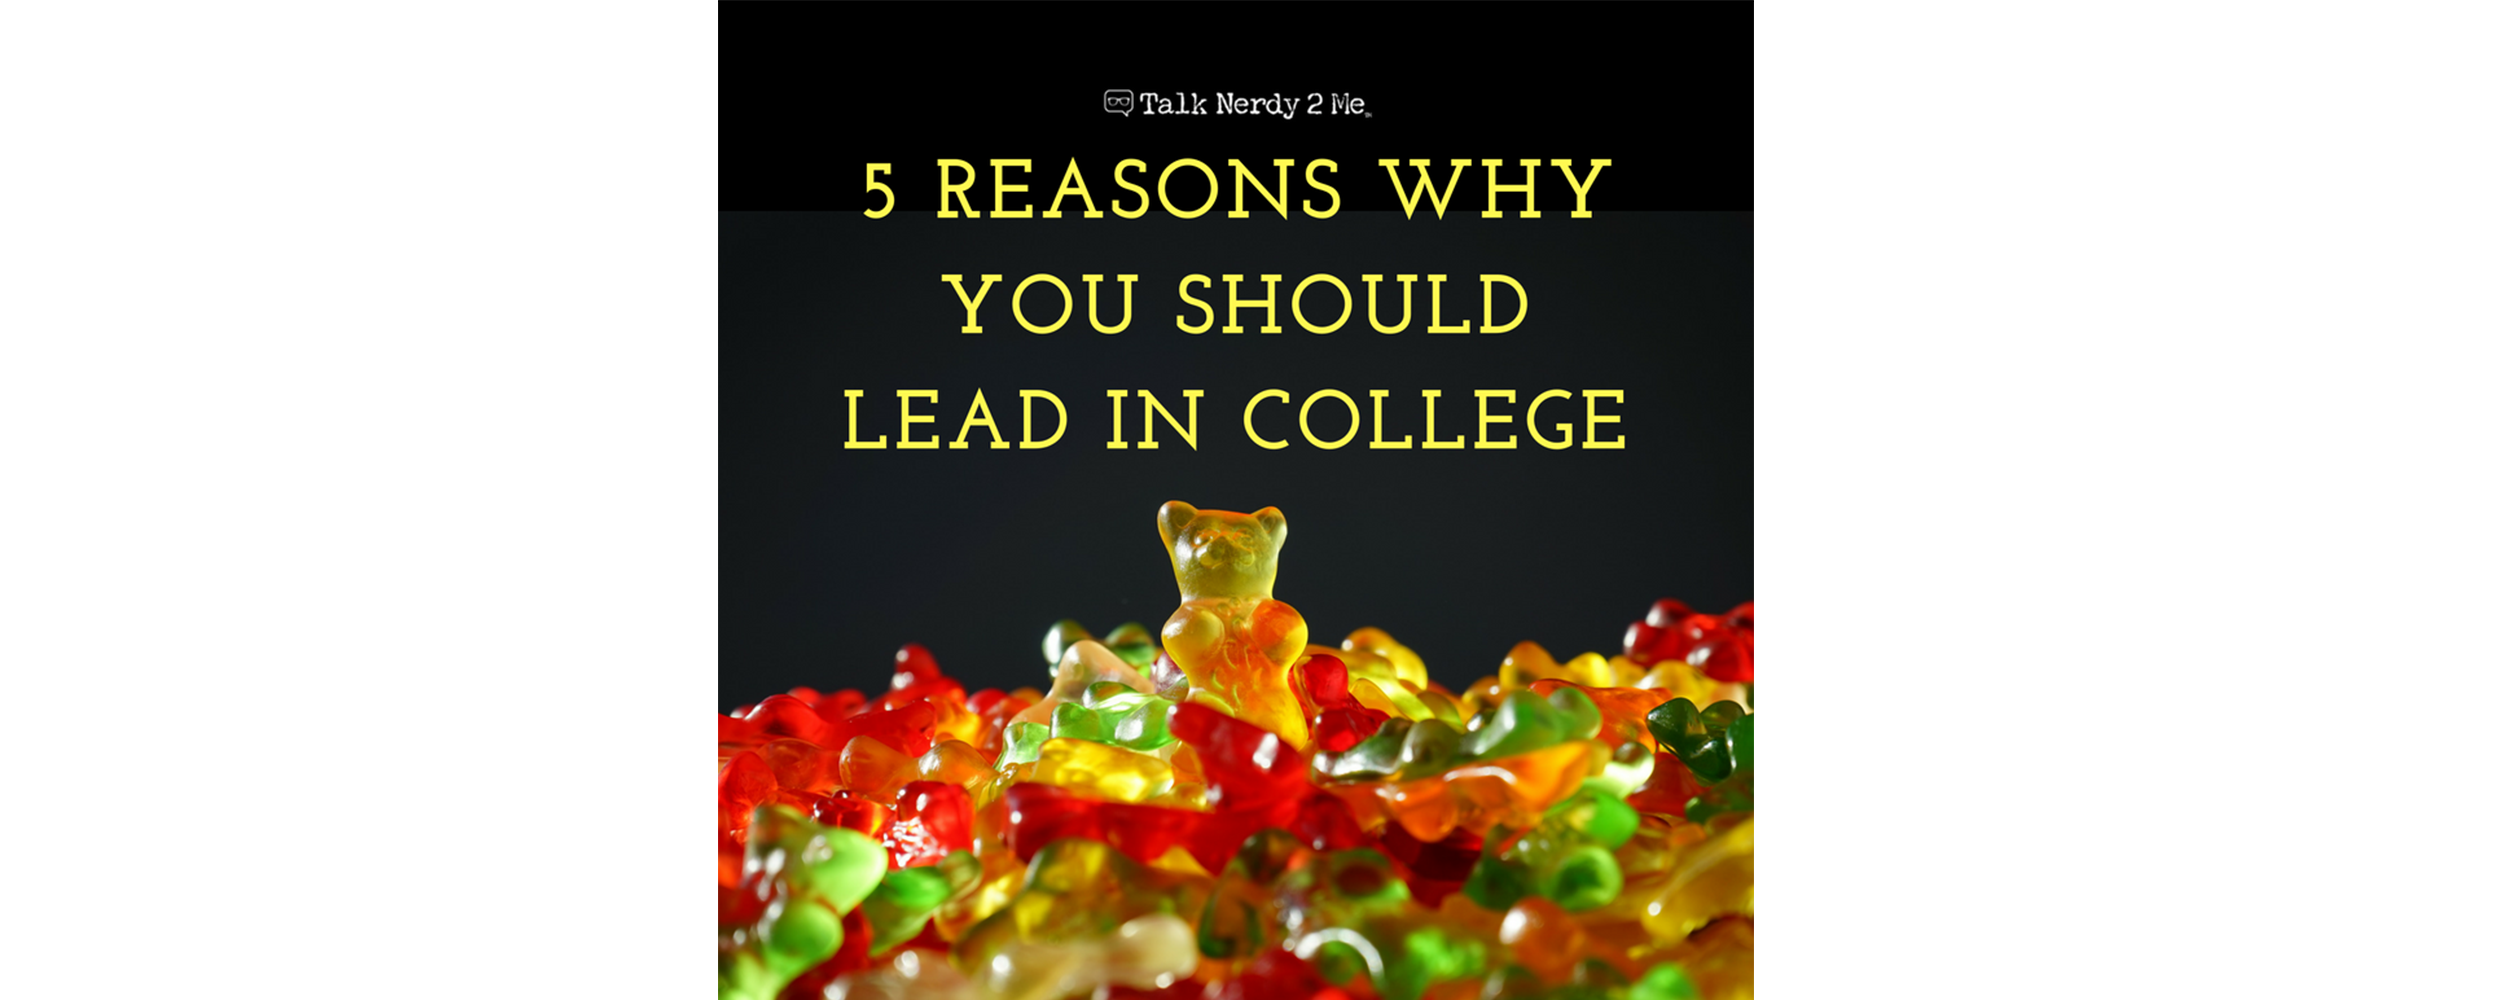 5 Reasons Why You Should Lead in College